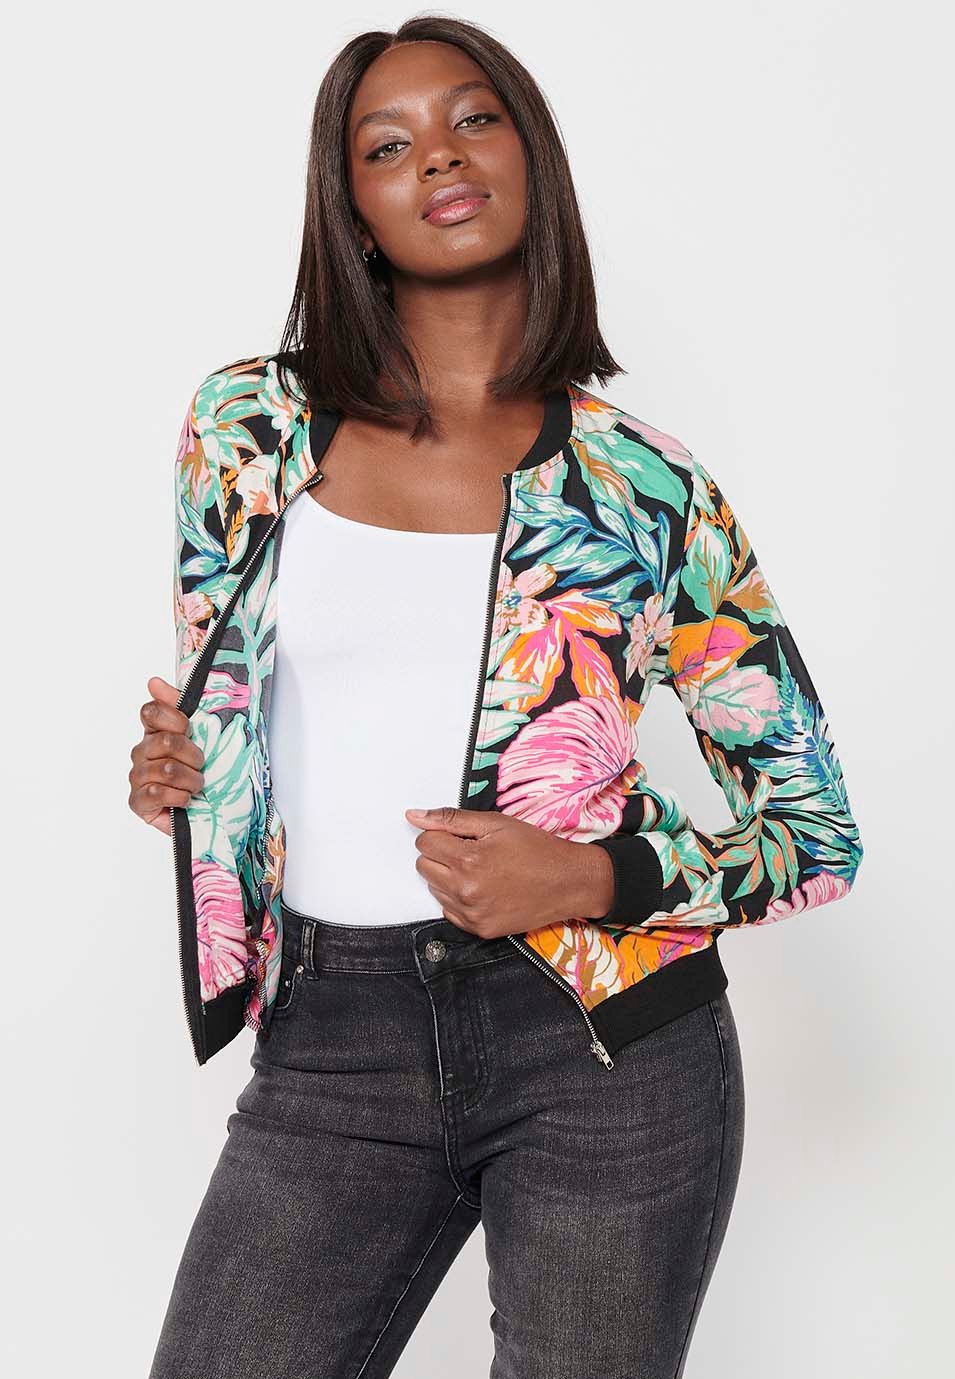 Long-sleeved sweatshirt jacket with ribbed finishes and floral print with front zipper closure. Composition 100% Polyester. Multicolor Color for Women from the Koröshi brand 6